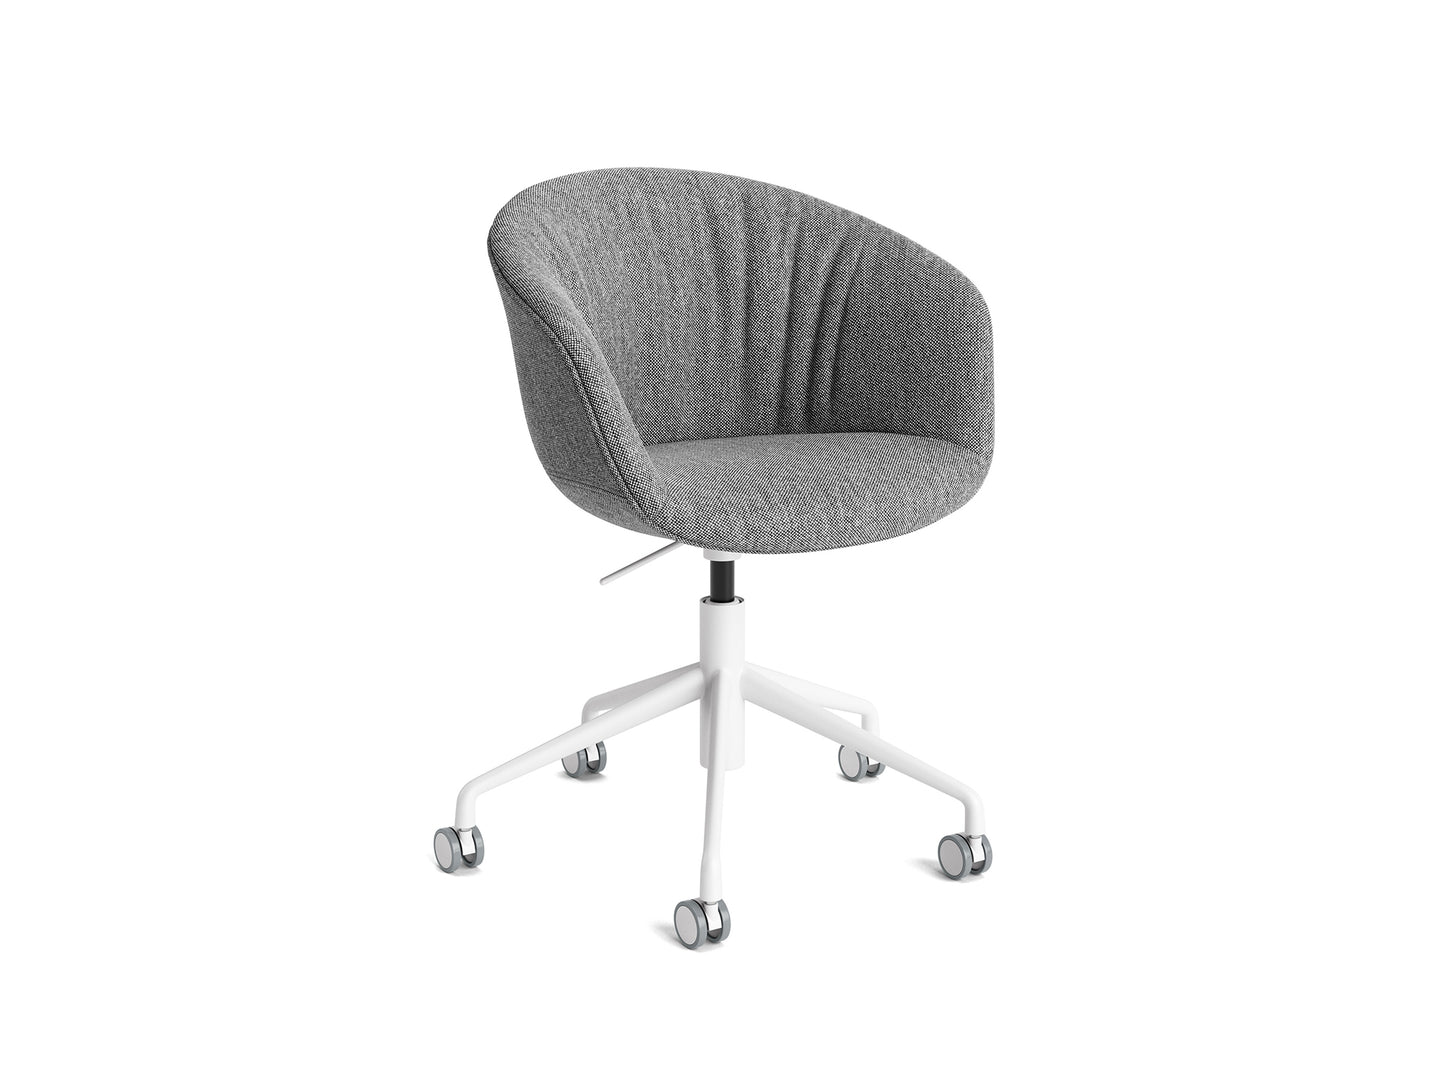 About A Chair AAC 53 Soft by HAY - Hallingdal 166 / White Powder Coated Aluminium